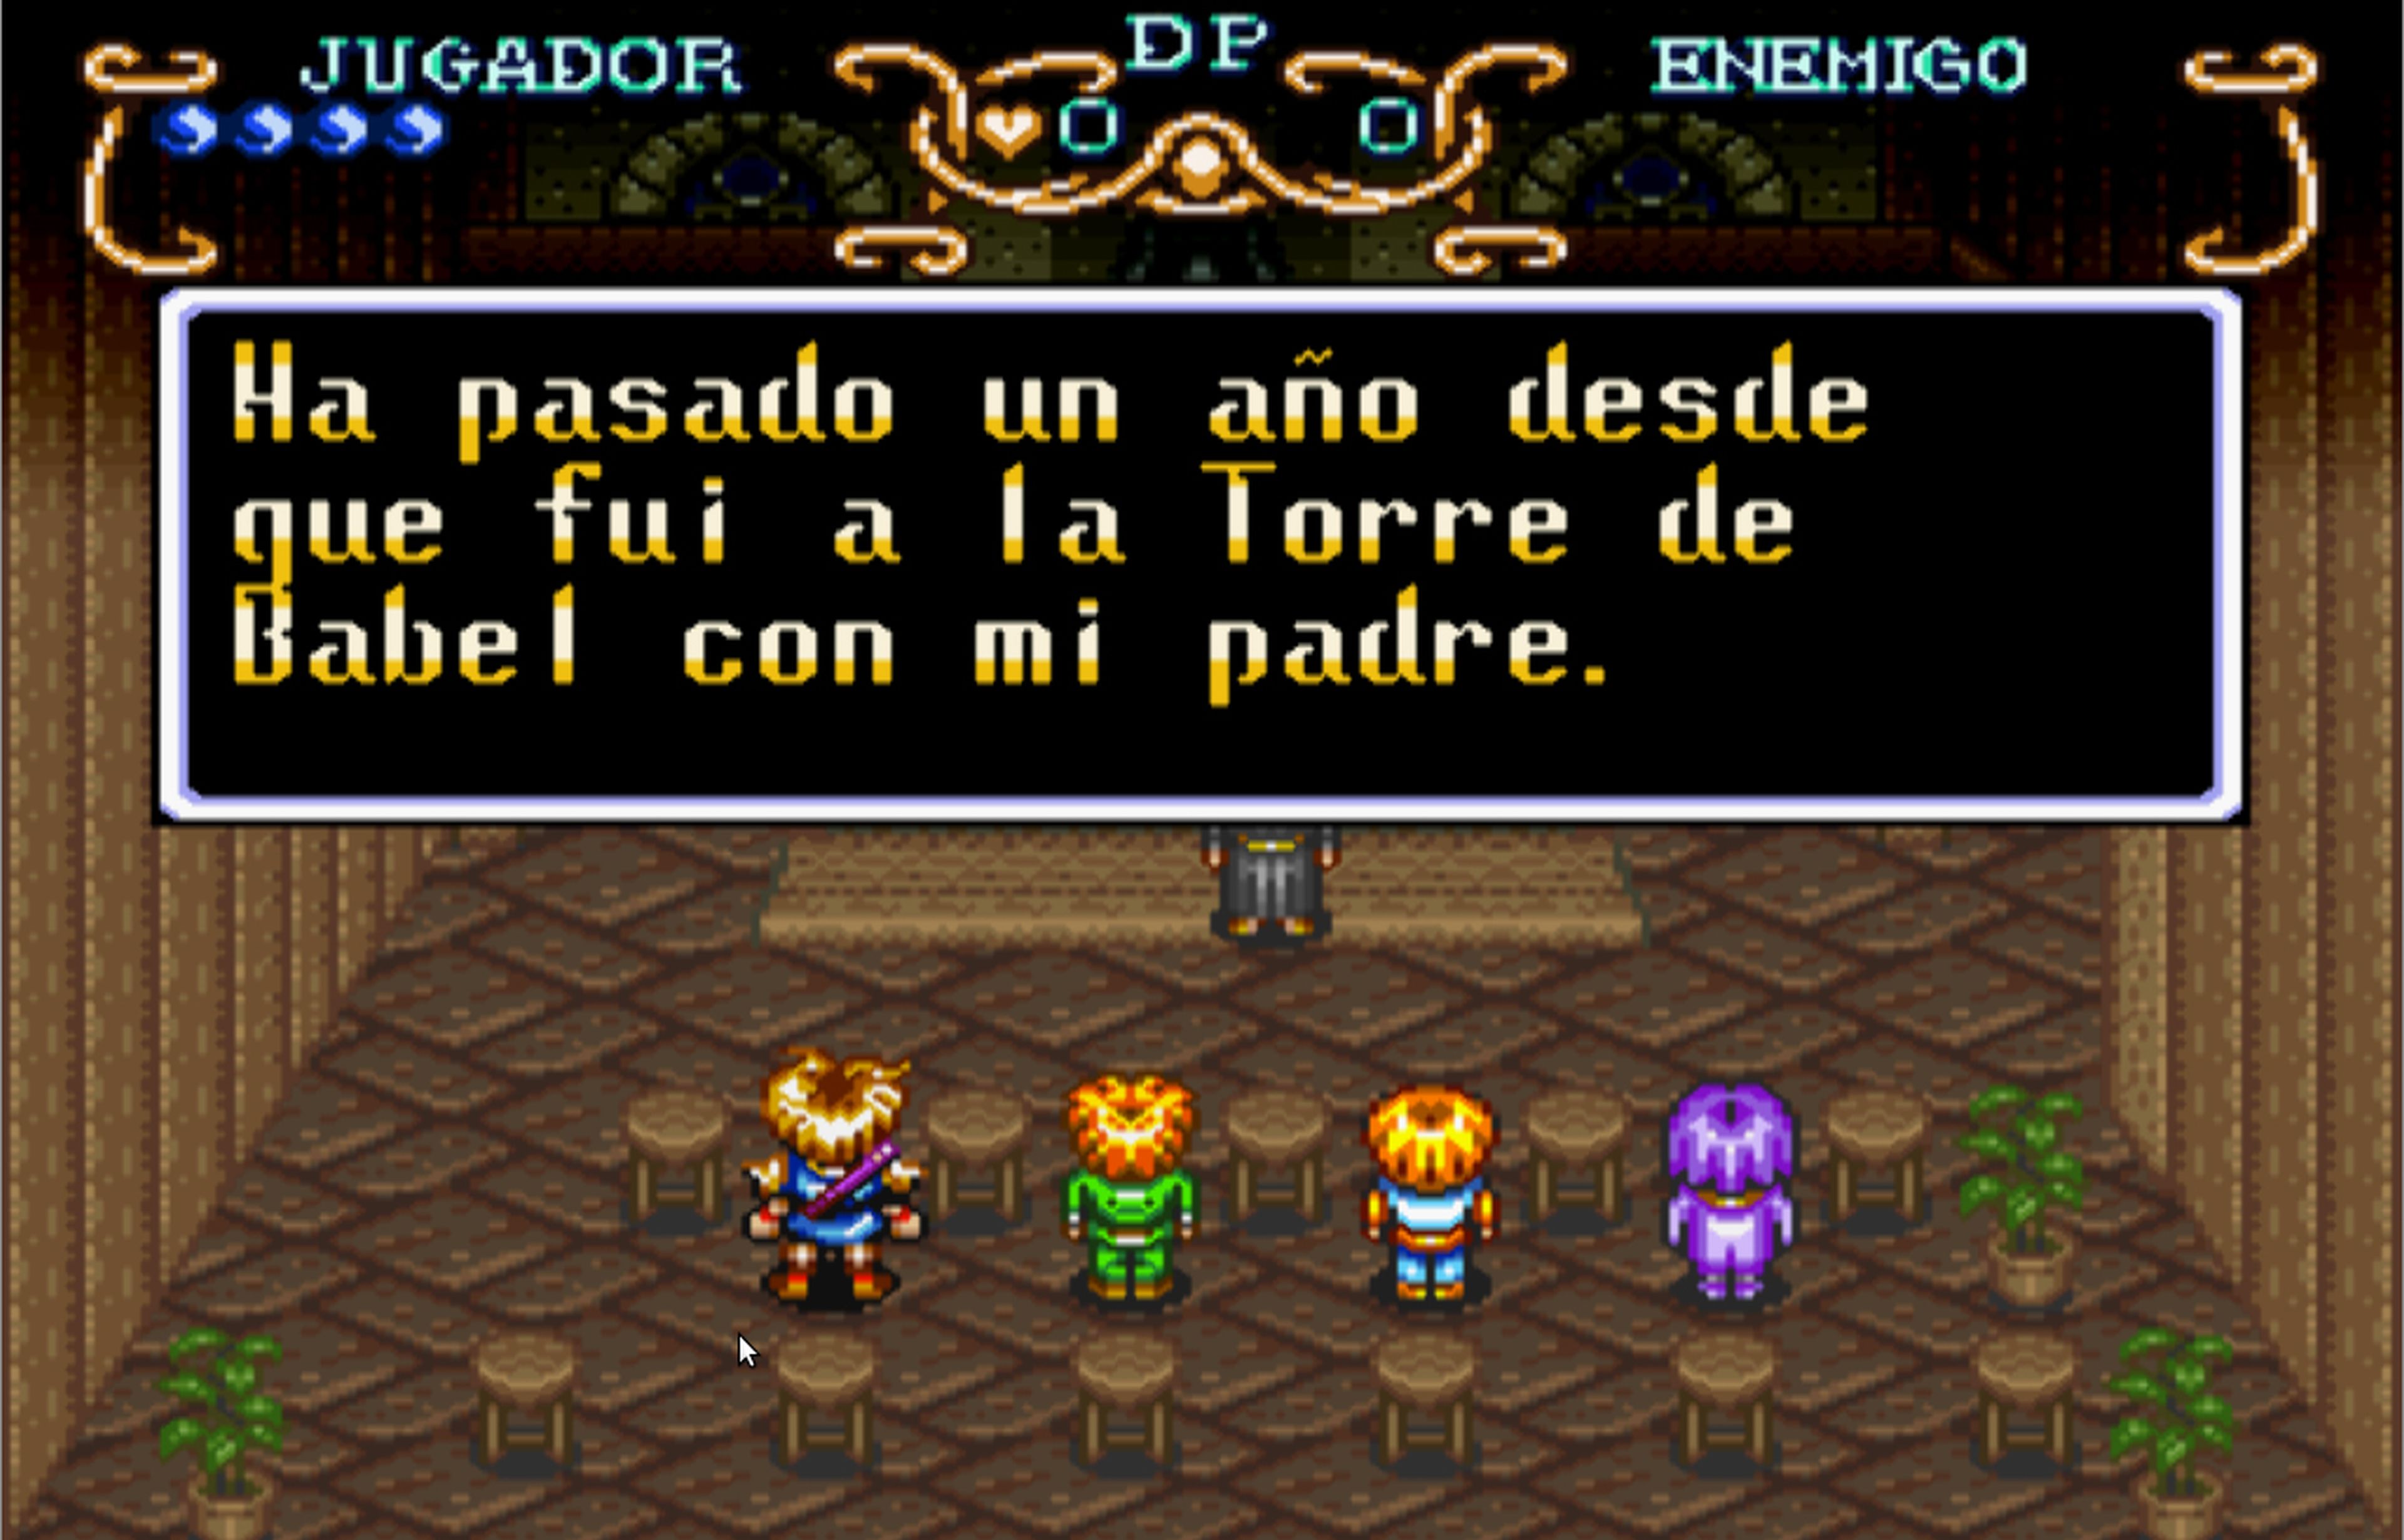 Hobby Consolas, hace 20 años: Illusion of Time